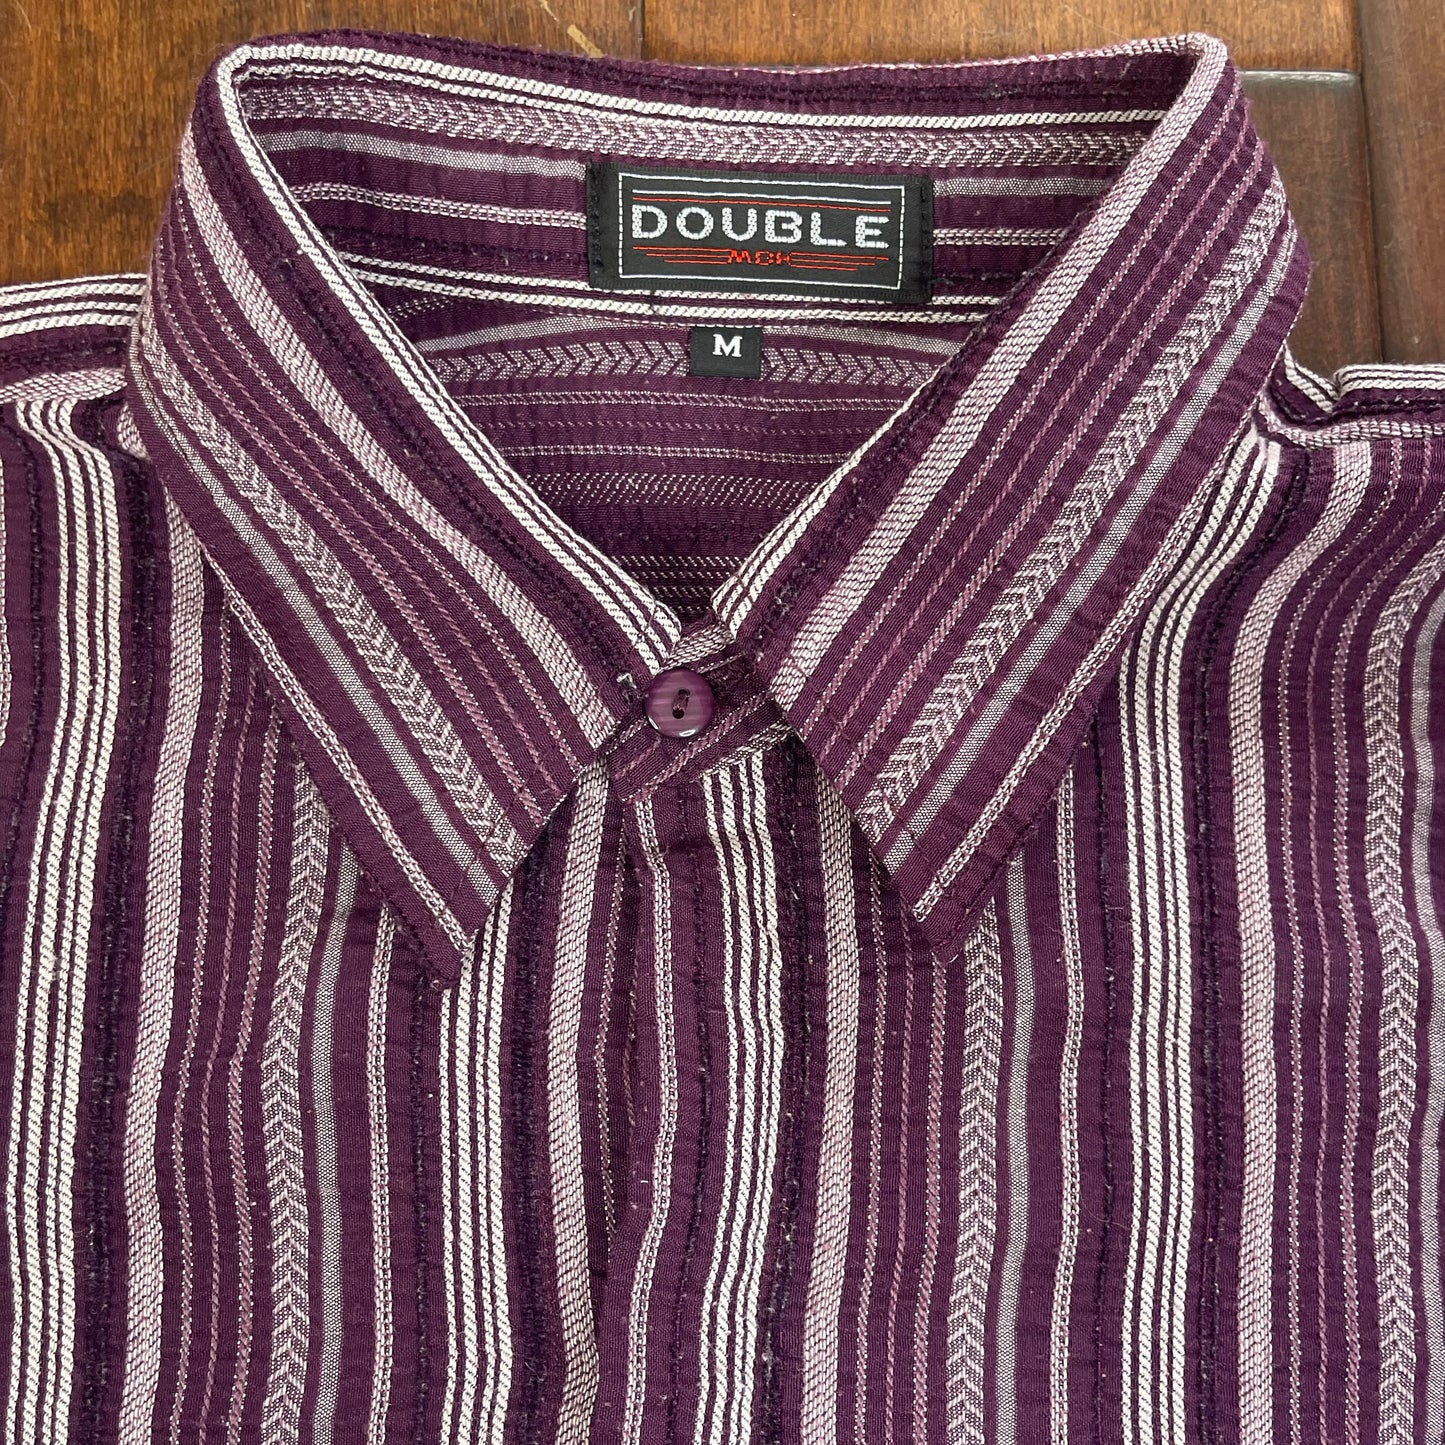 VINTAGE STRIPED BUTTON-UP